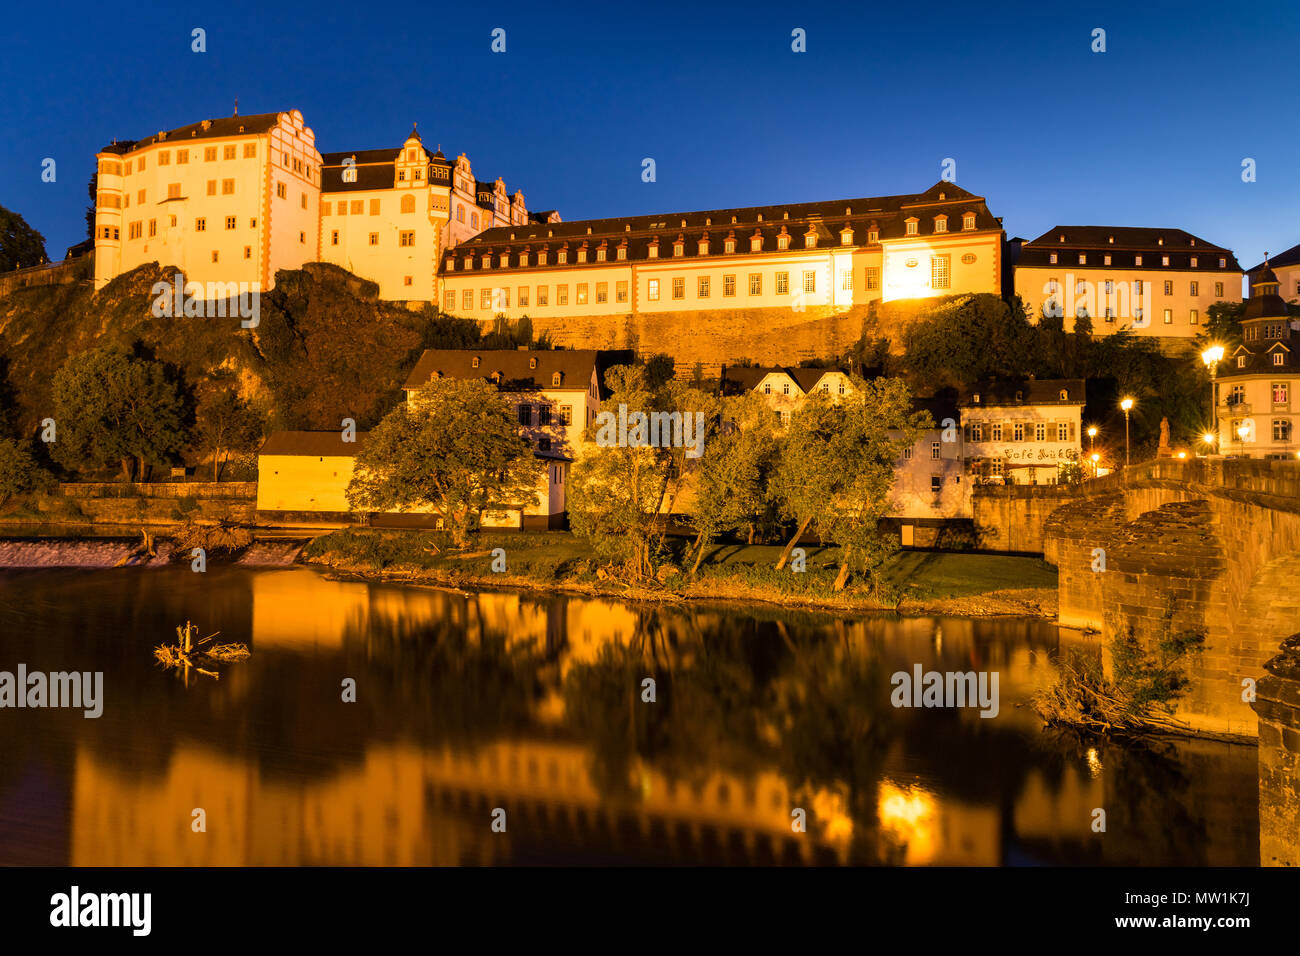 Weilburg Castle, reflection in the river Lahn, at night, Weilburg an der Lahn, Hesse, Germany Stock Photo